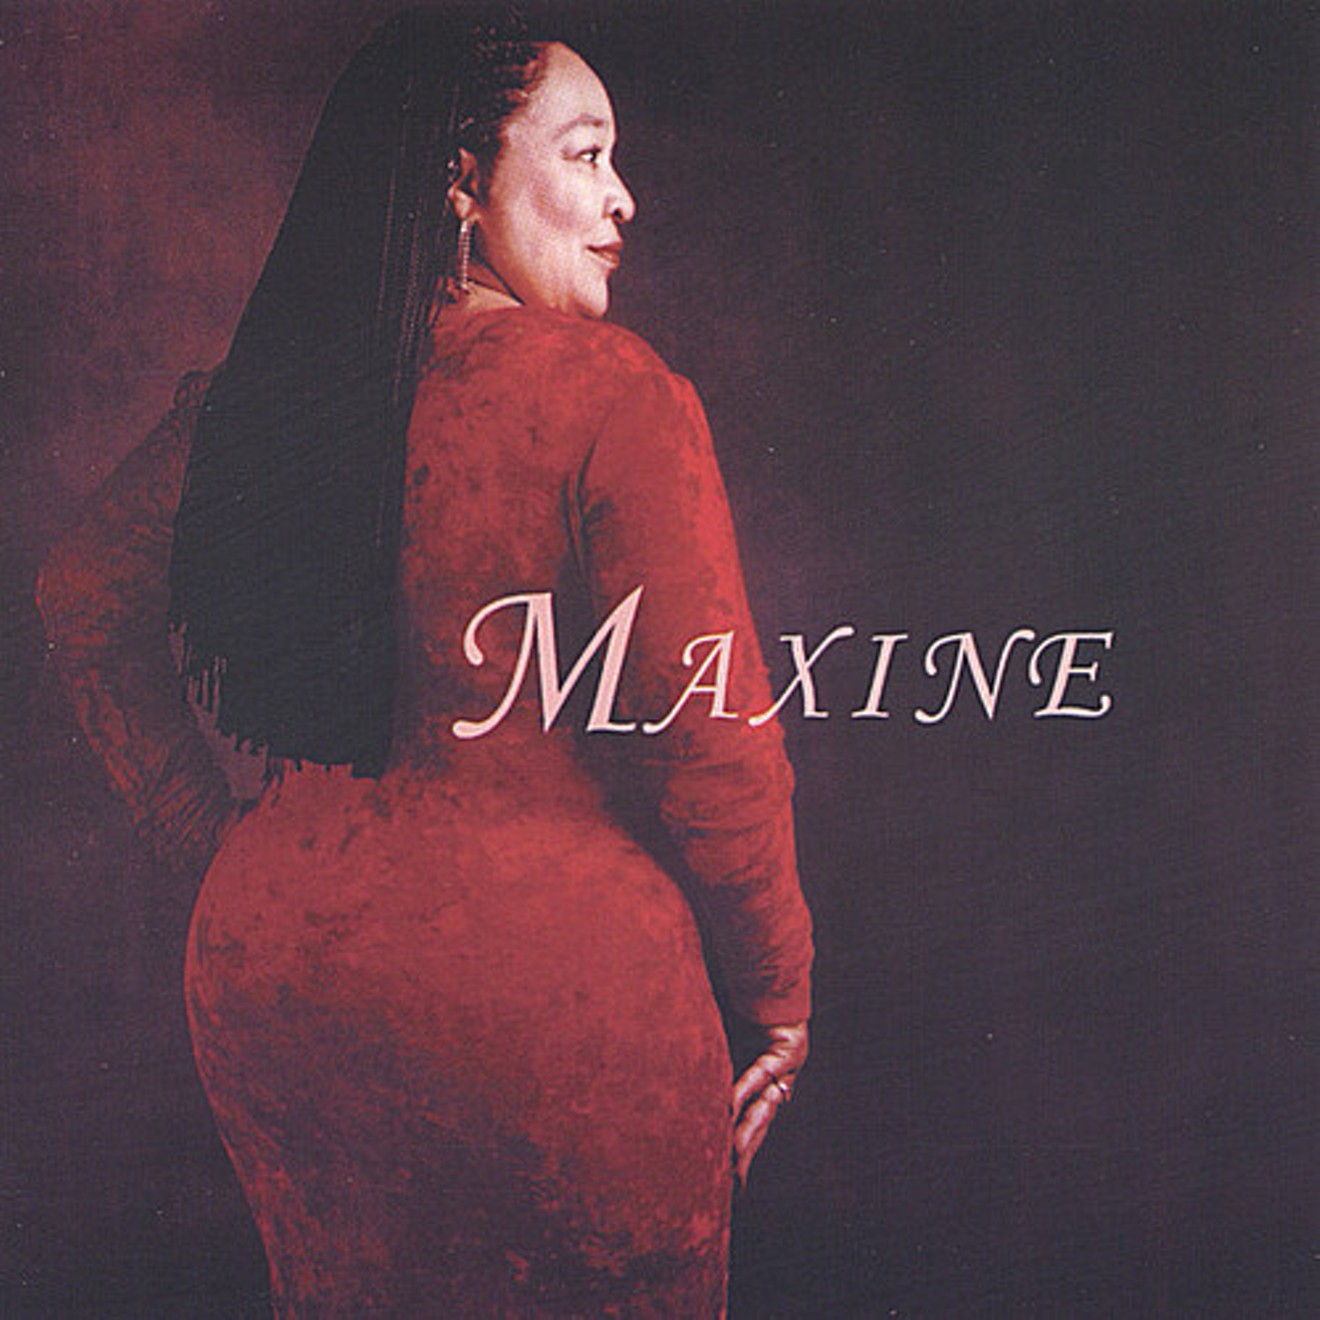 After resuming her solo career, Maxine Johnson released a CD in the 1990s.